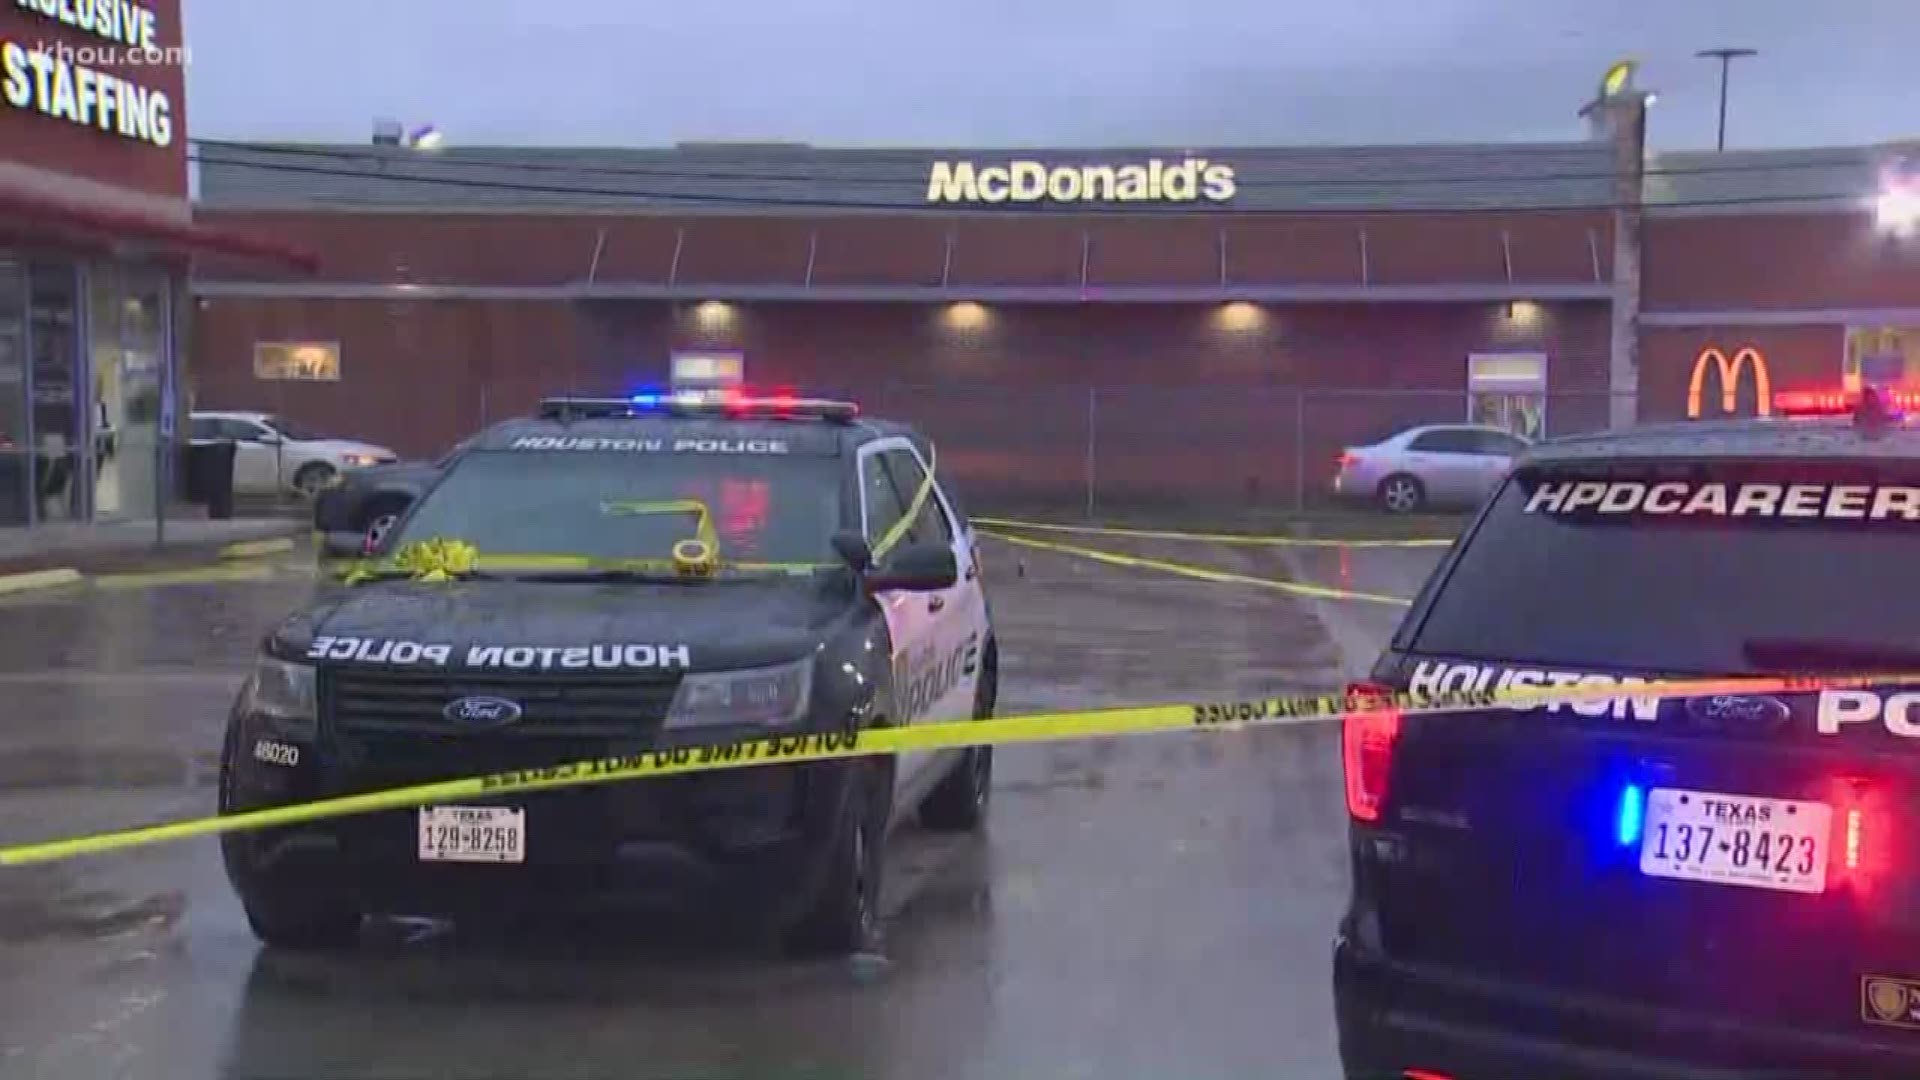 A young child was shot in the leg Monday during an attempted robbery at a McDonald's in north Houston.